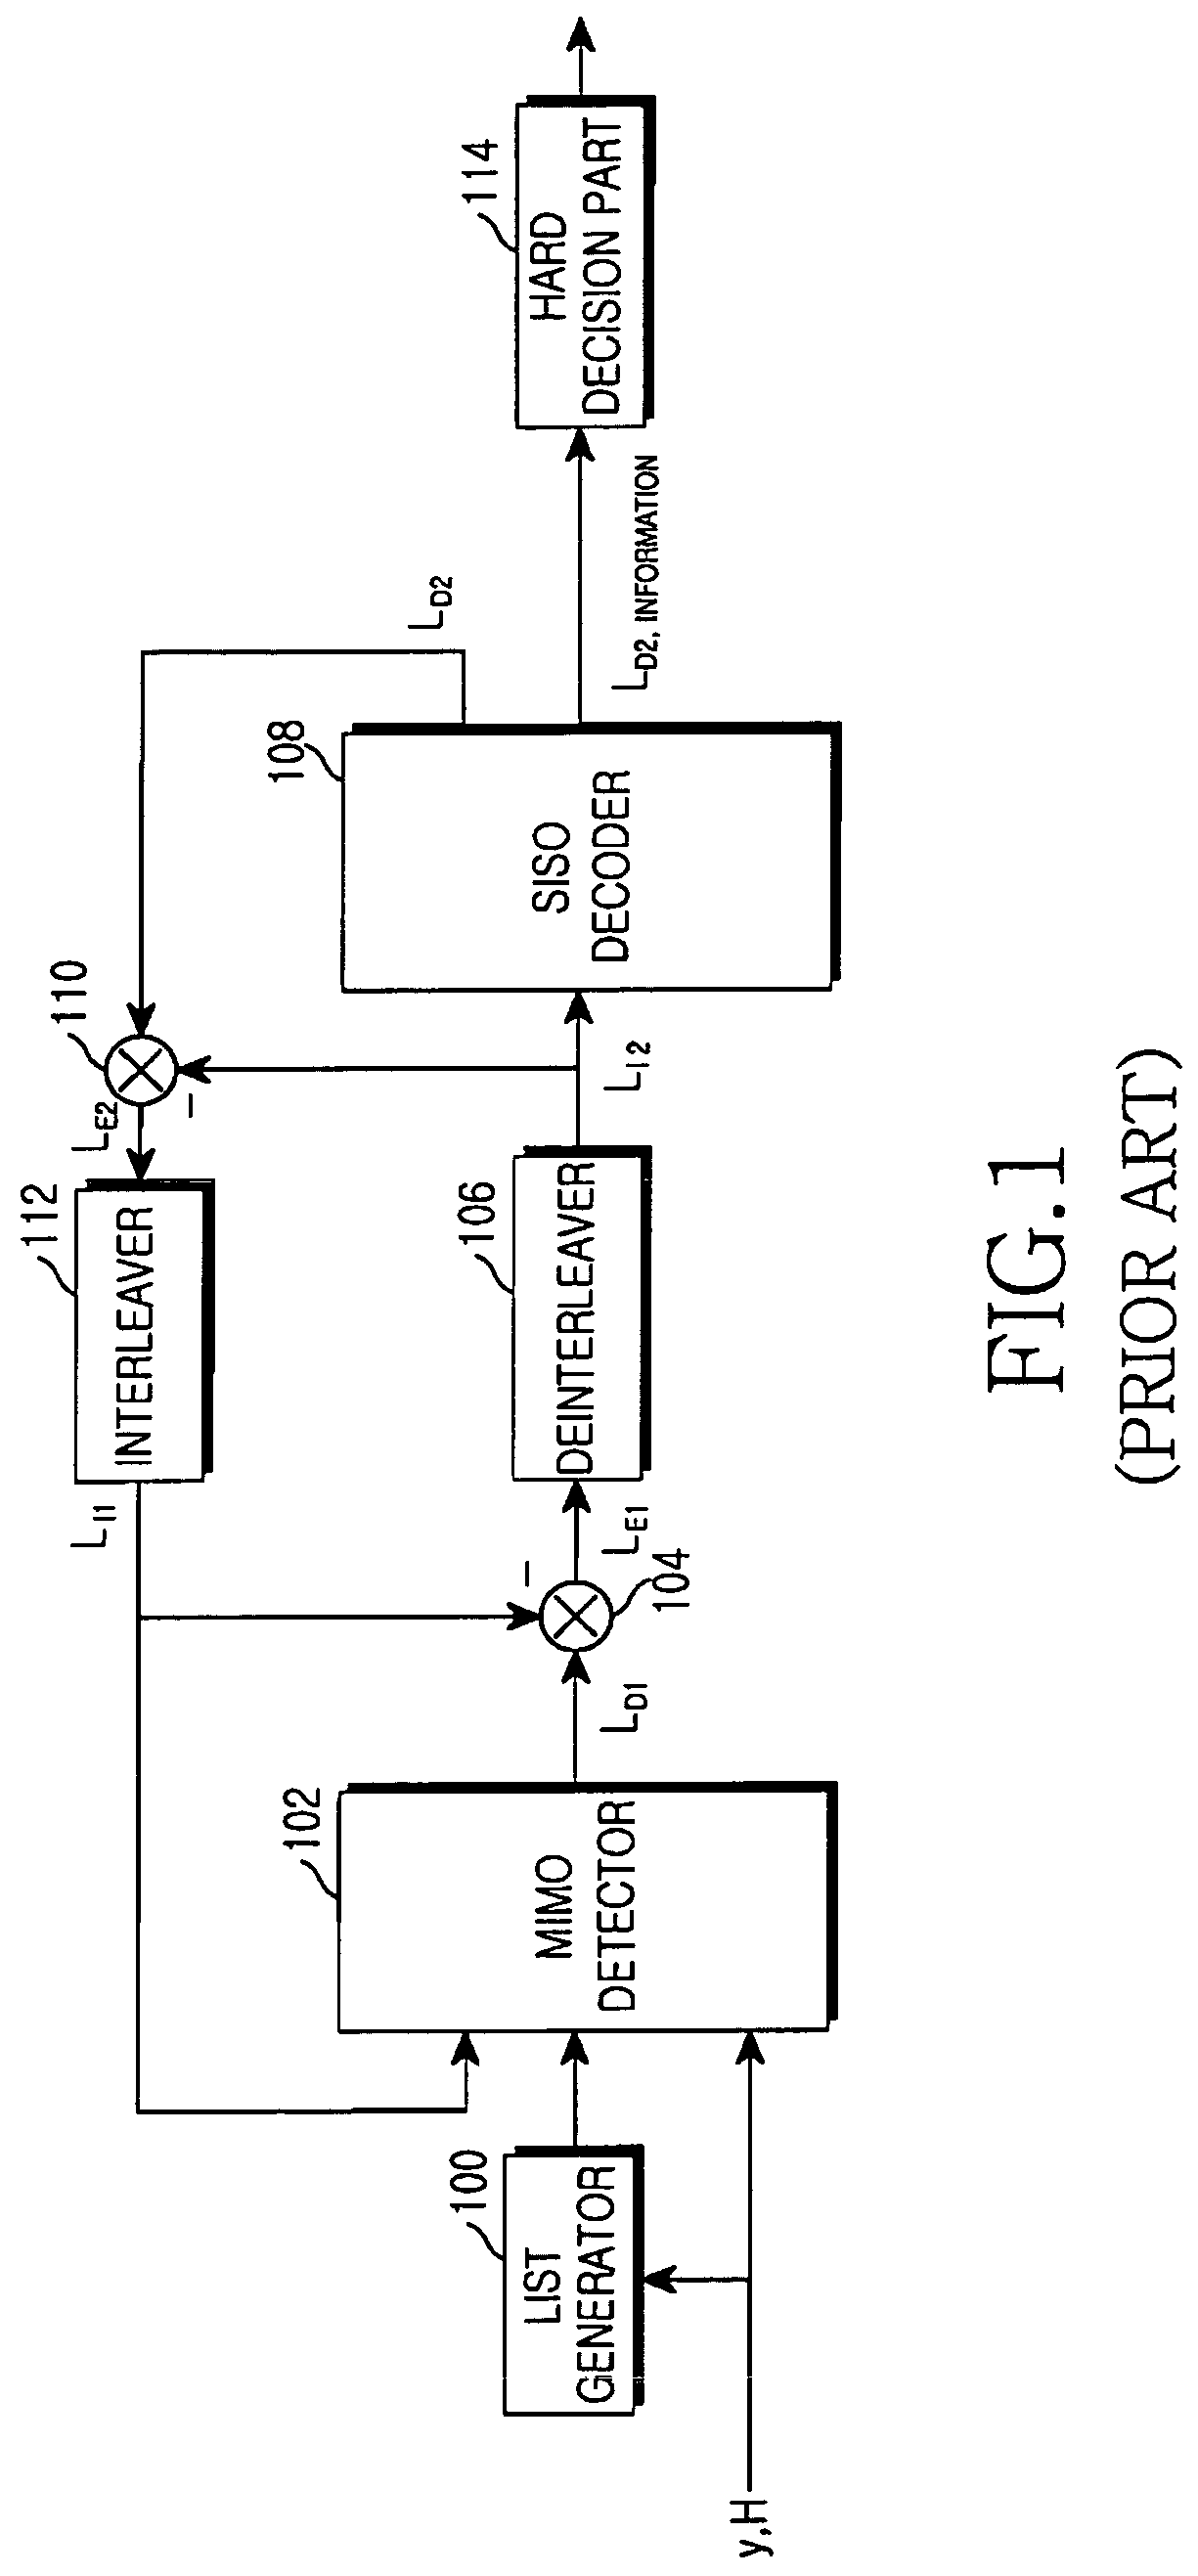 Apparatus and method for iterative detection and decoding (IDD) in multi-antenna communication system